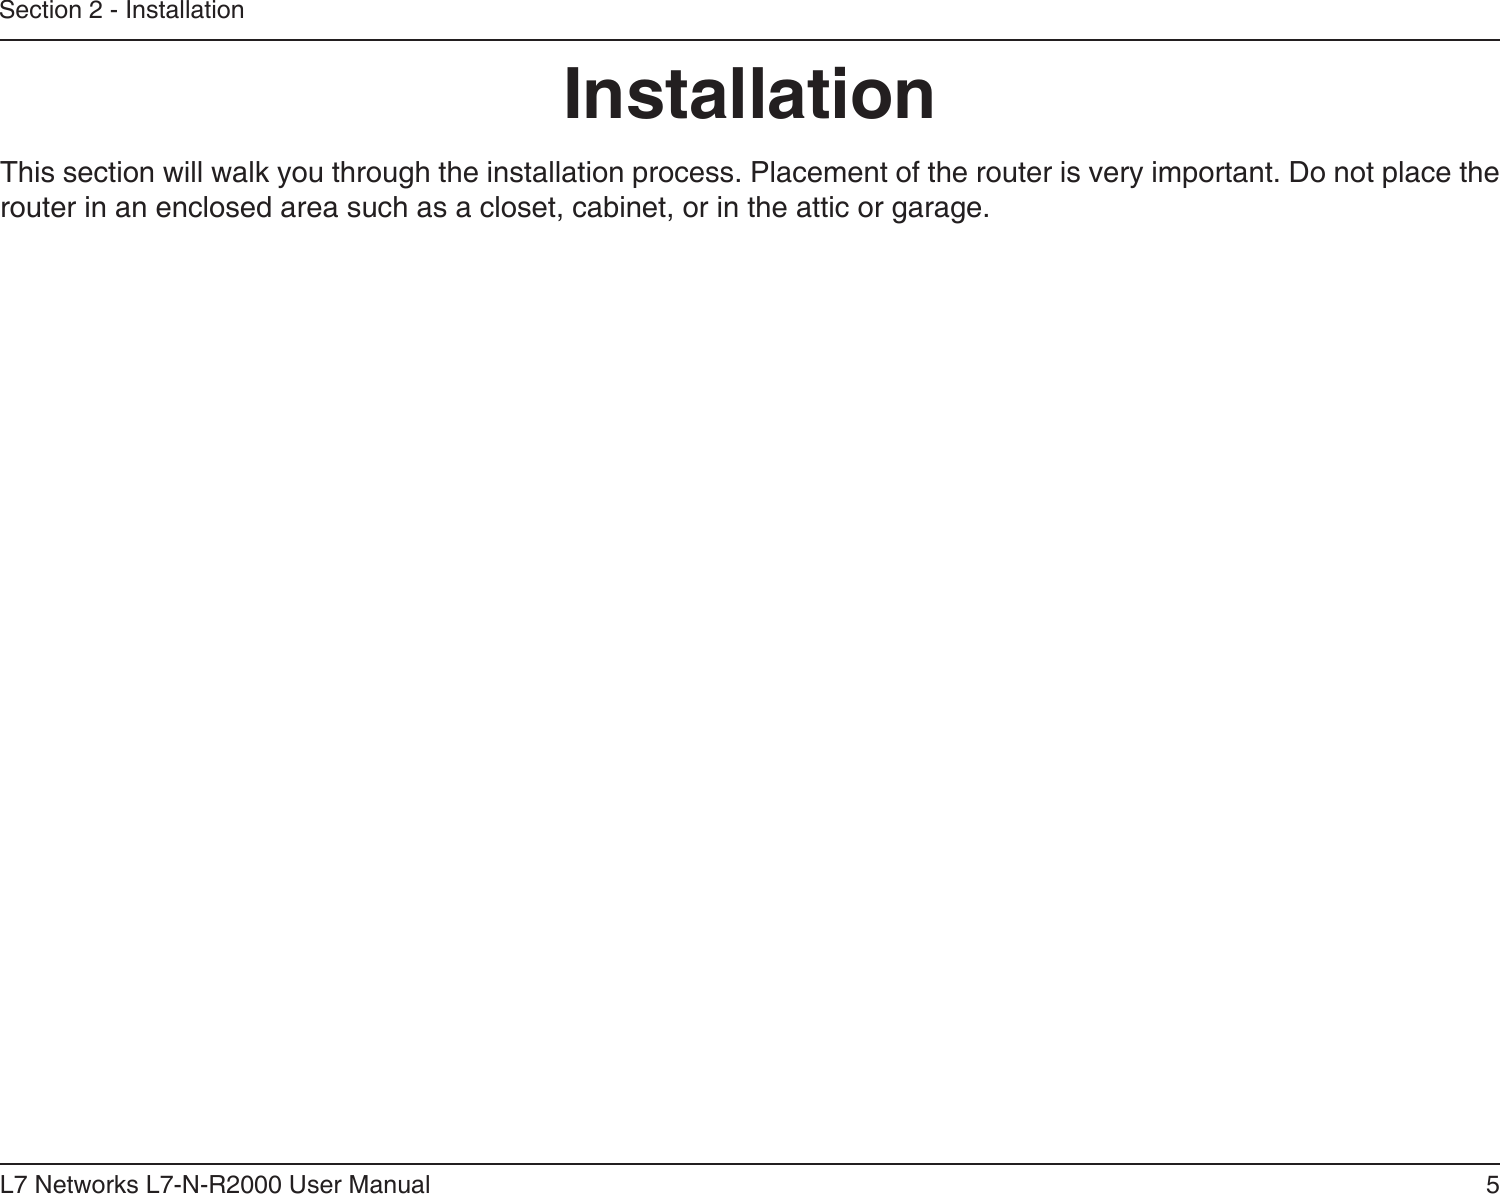 5L7 Networks L7-N-R2000 User ManualSection 2 - InstallationInstallationThis section will walk you through the installation process. Placement of the router is very important. Do not place the router in an enclosed area such as a closet, cabinet, or in the attic or garage. 